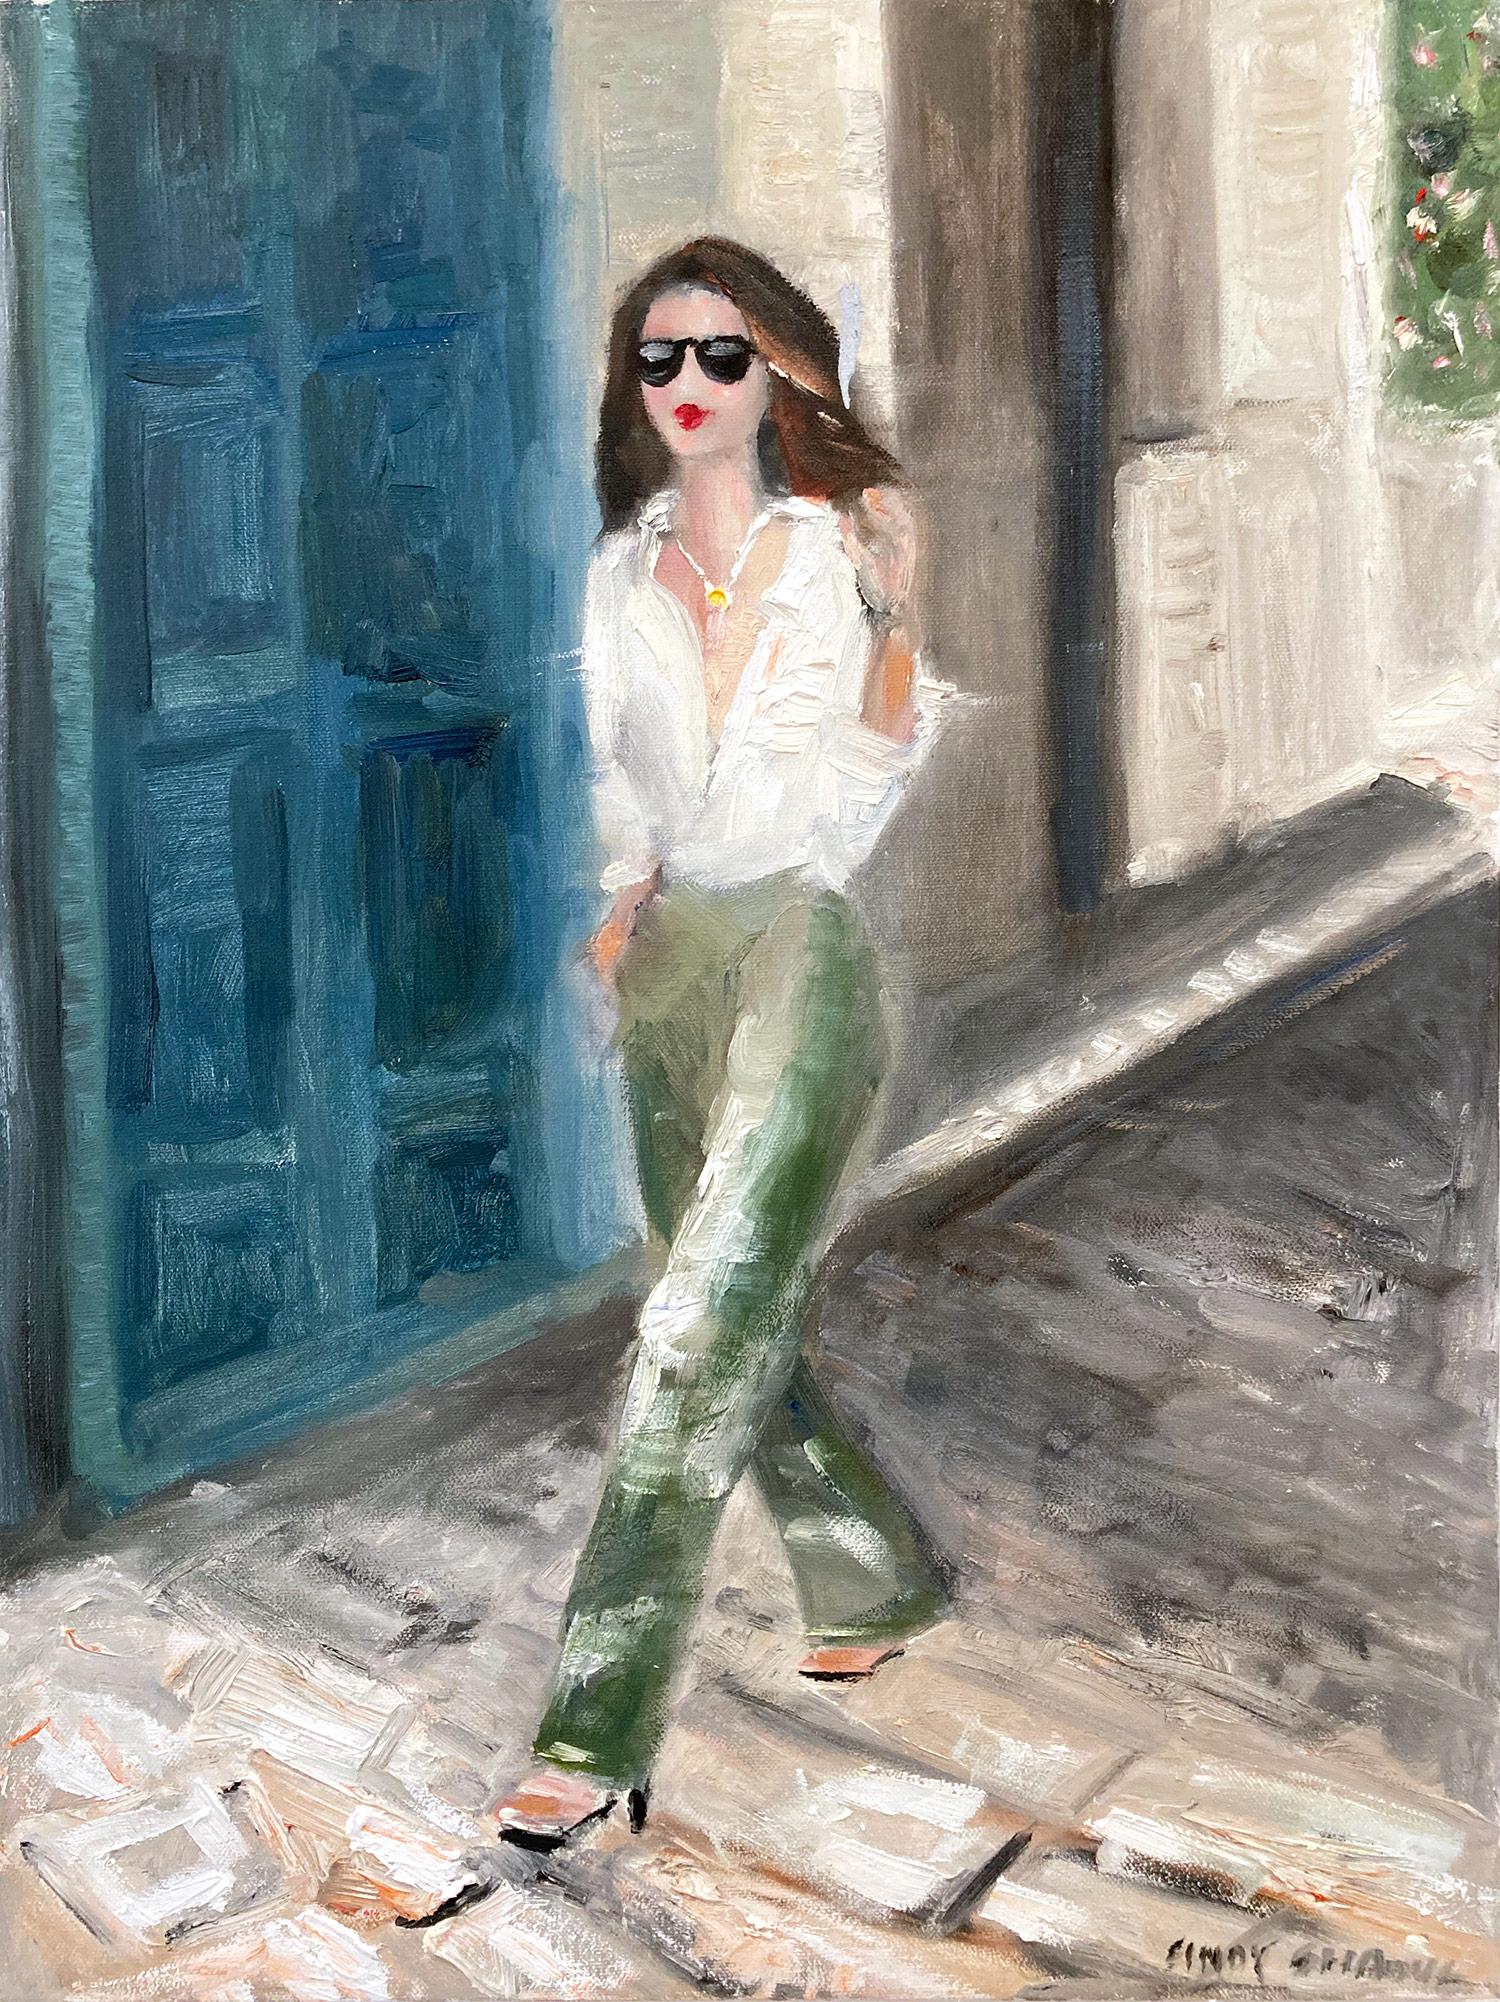 Cindy Shaoul Figurative Painting - "Stepping Out - Barcelona" Impressionist Landscape Scene Oil Painting on Canvas